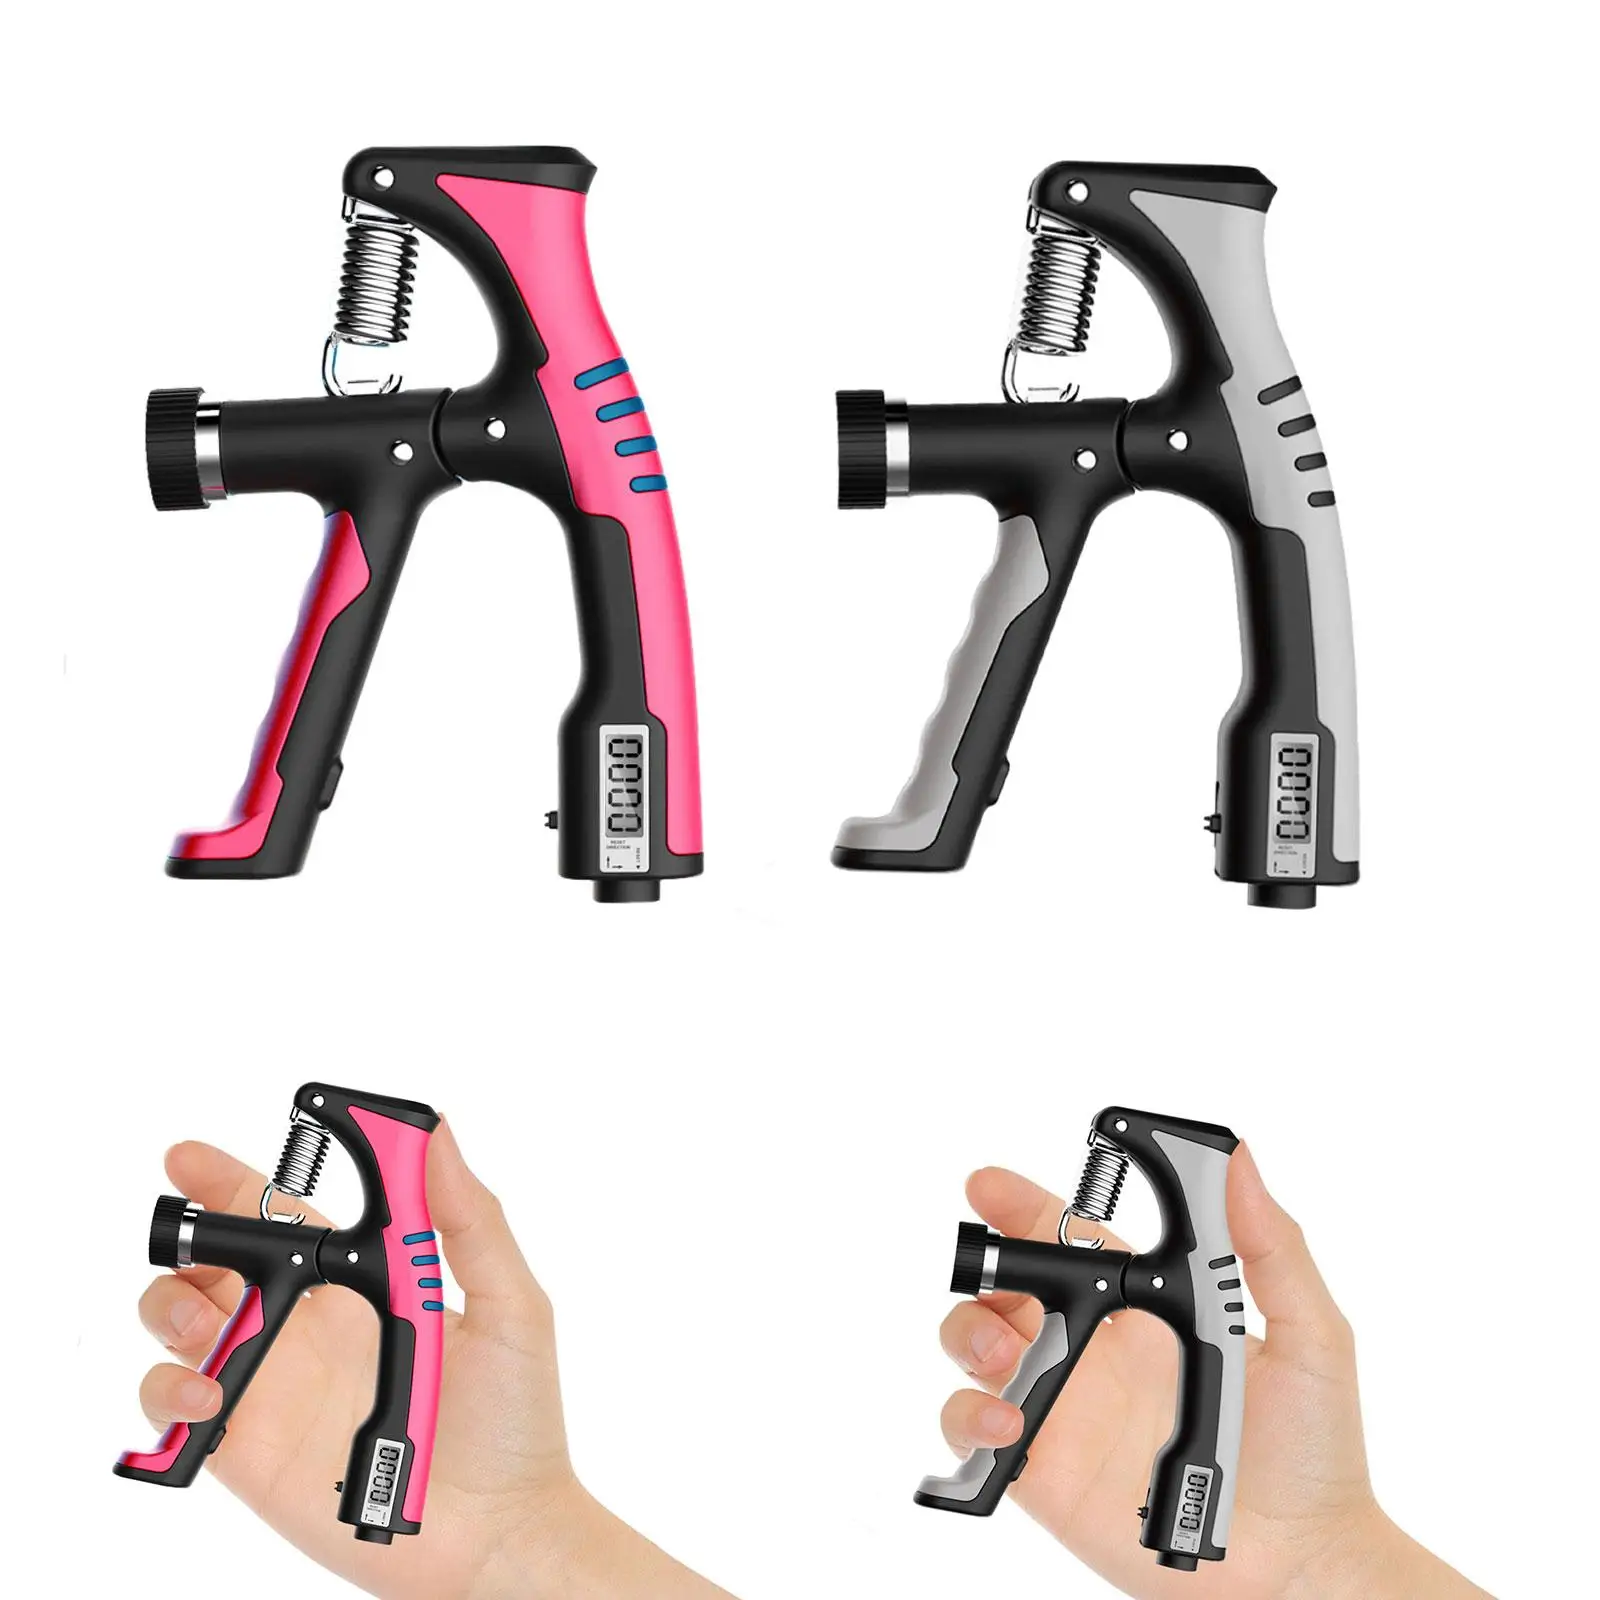 Hand Grip Strengthener Adjustable Resistance Heavy Duty Workout with Counter for Guitar Men Women Beginners Player Athlete